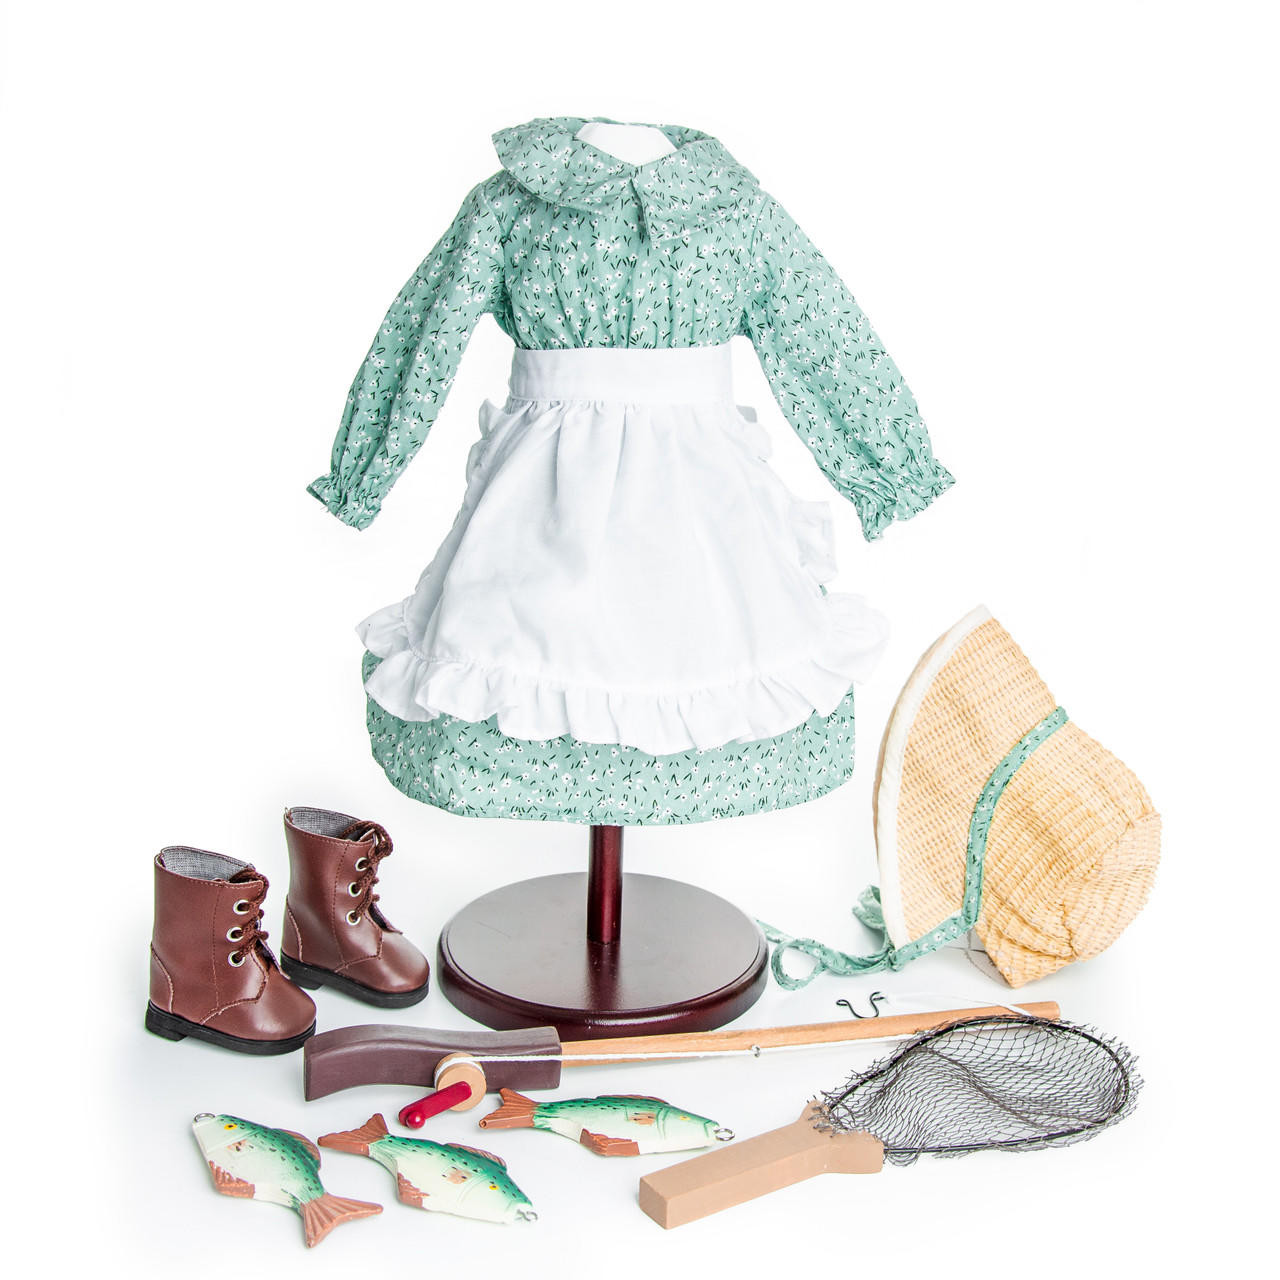 Officially Licensed Little House on The Prairie® 18 Inch Doll Outfit!  Authentic 1800's American Design Calico Dress & Bonnet with White Apron.  Fits